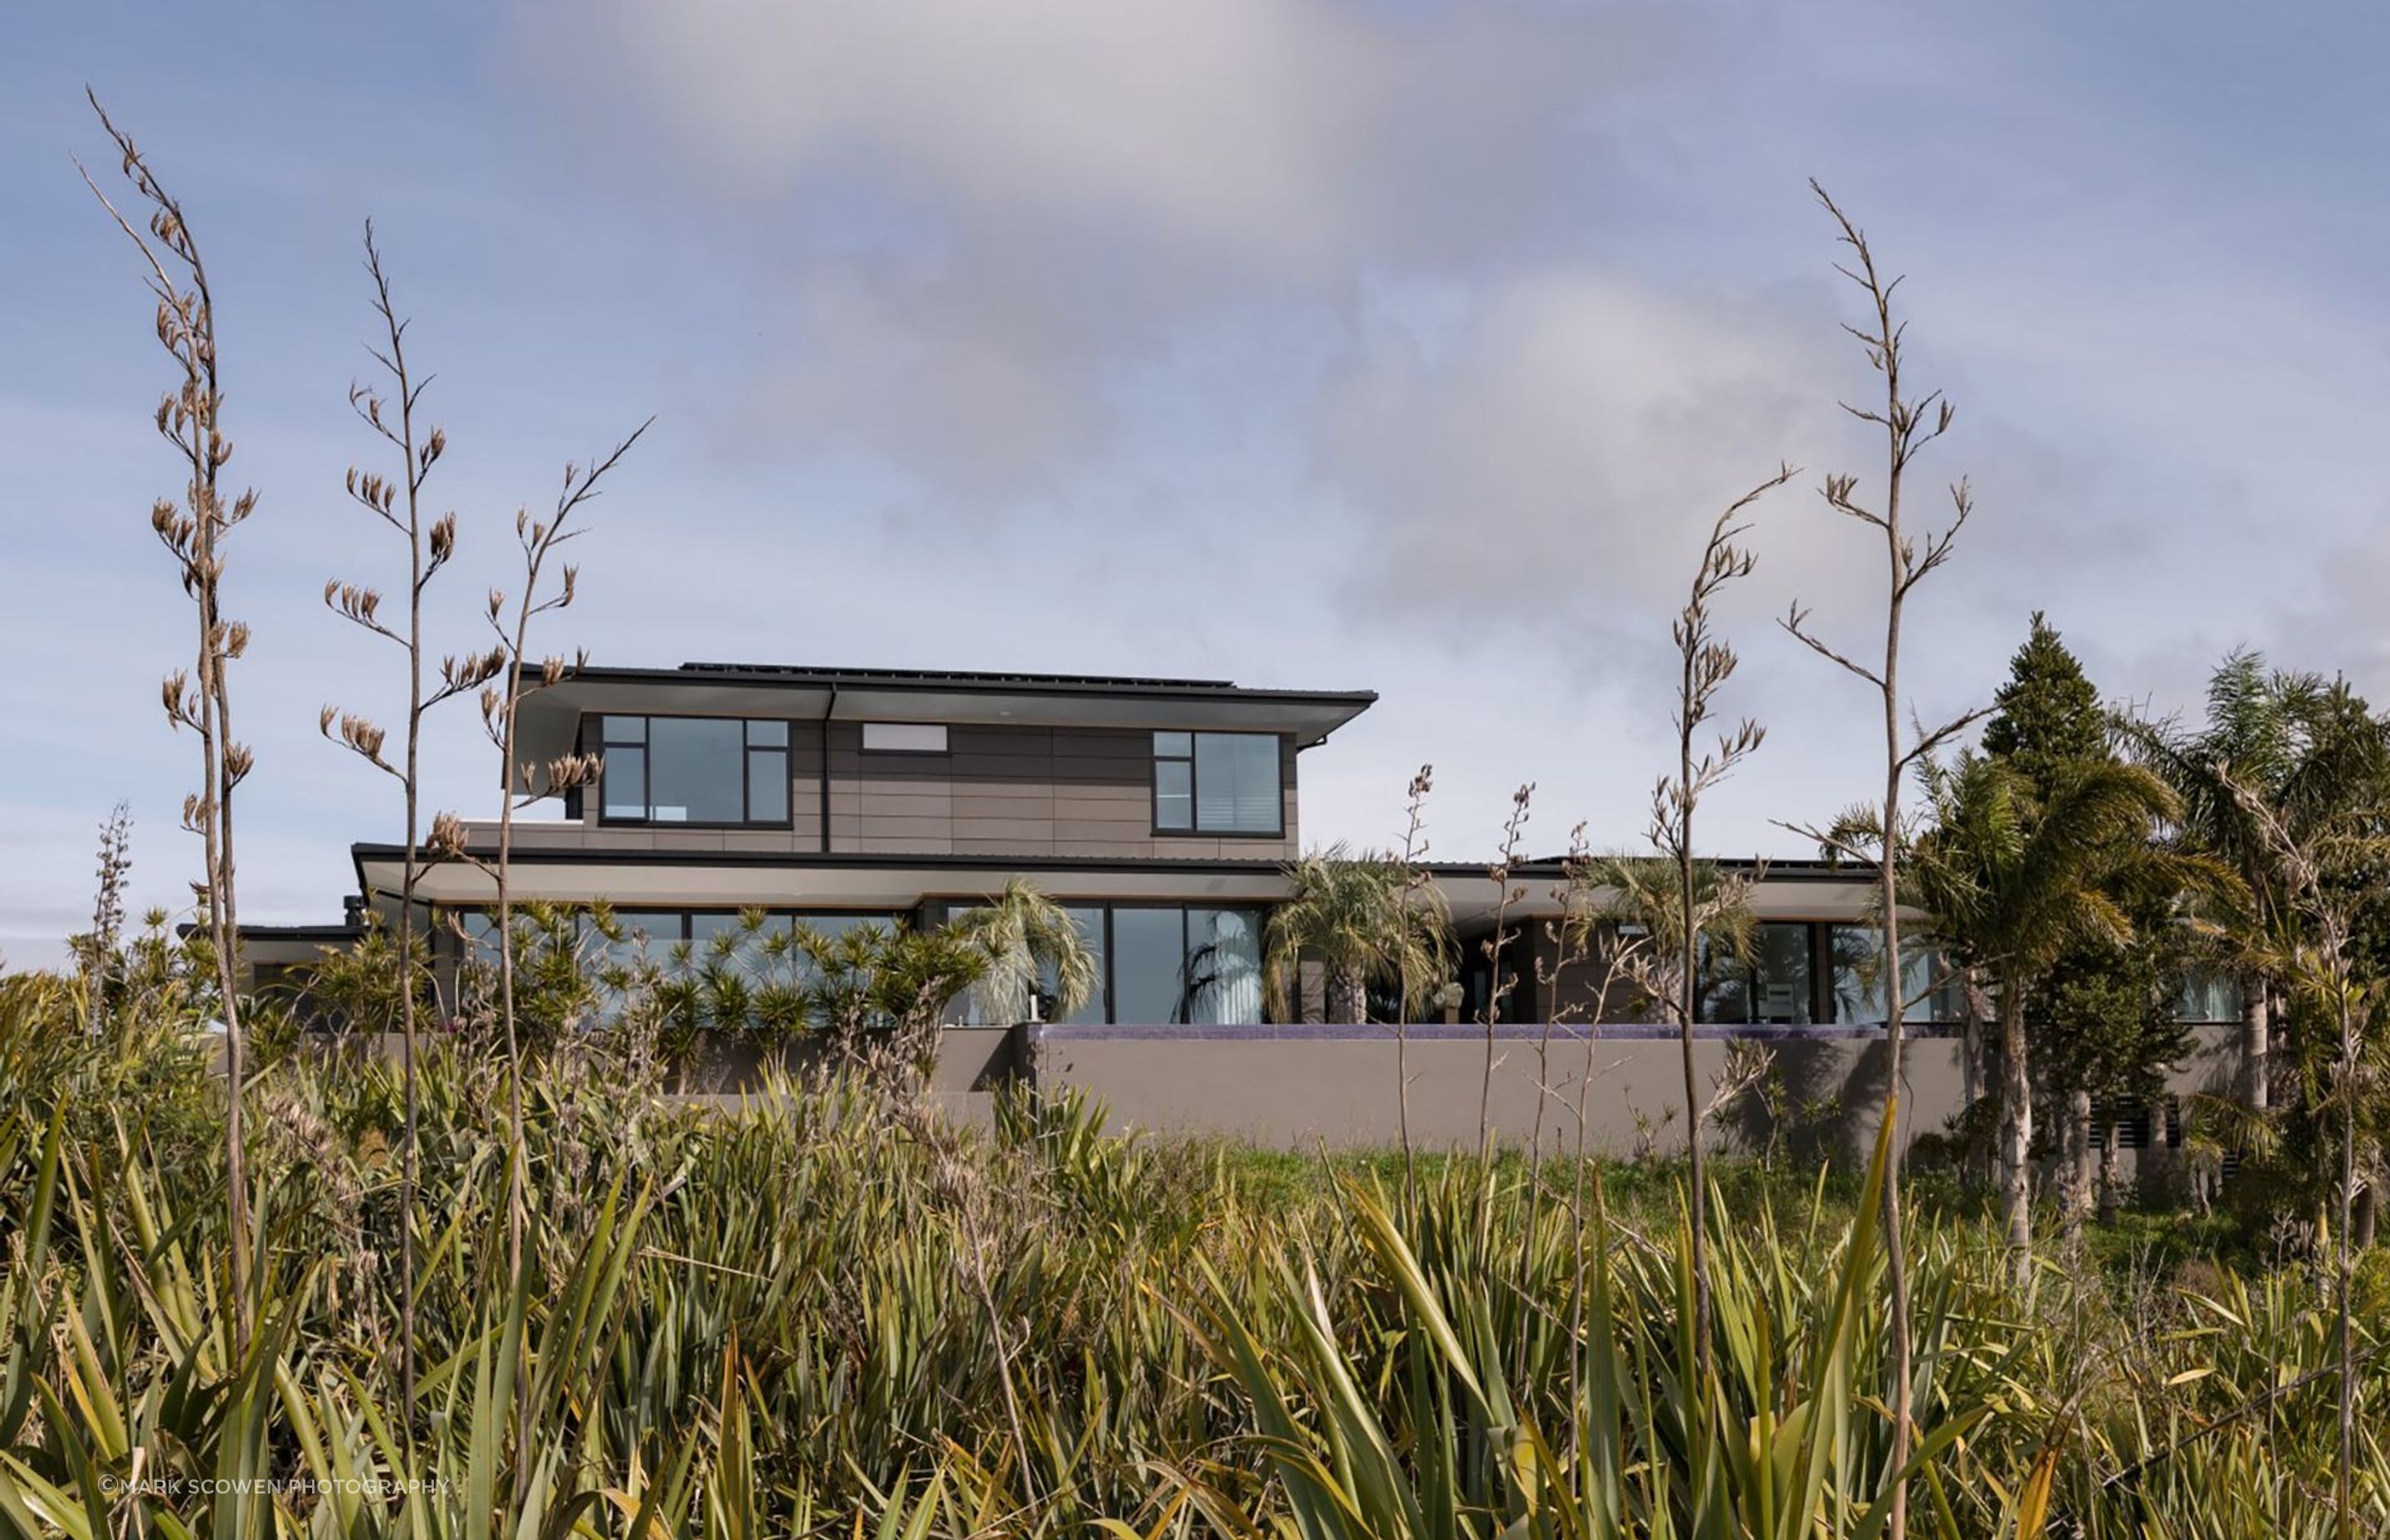 The house is designed to sit sympathetically within the coastal landscape.